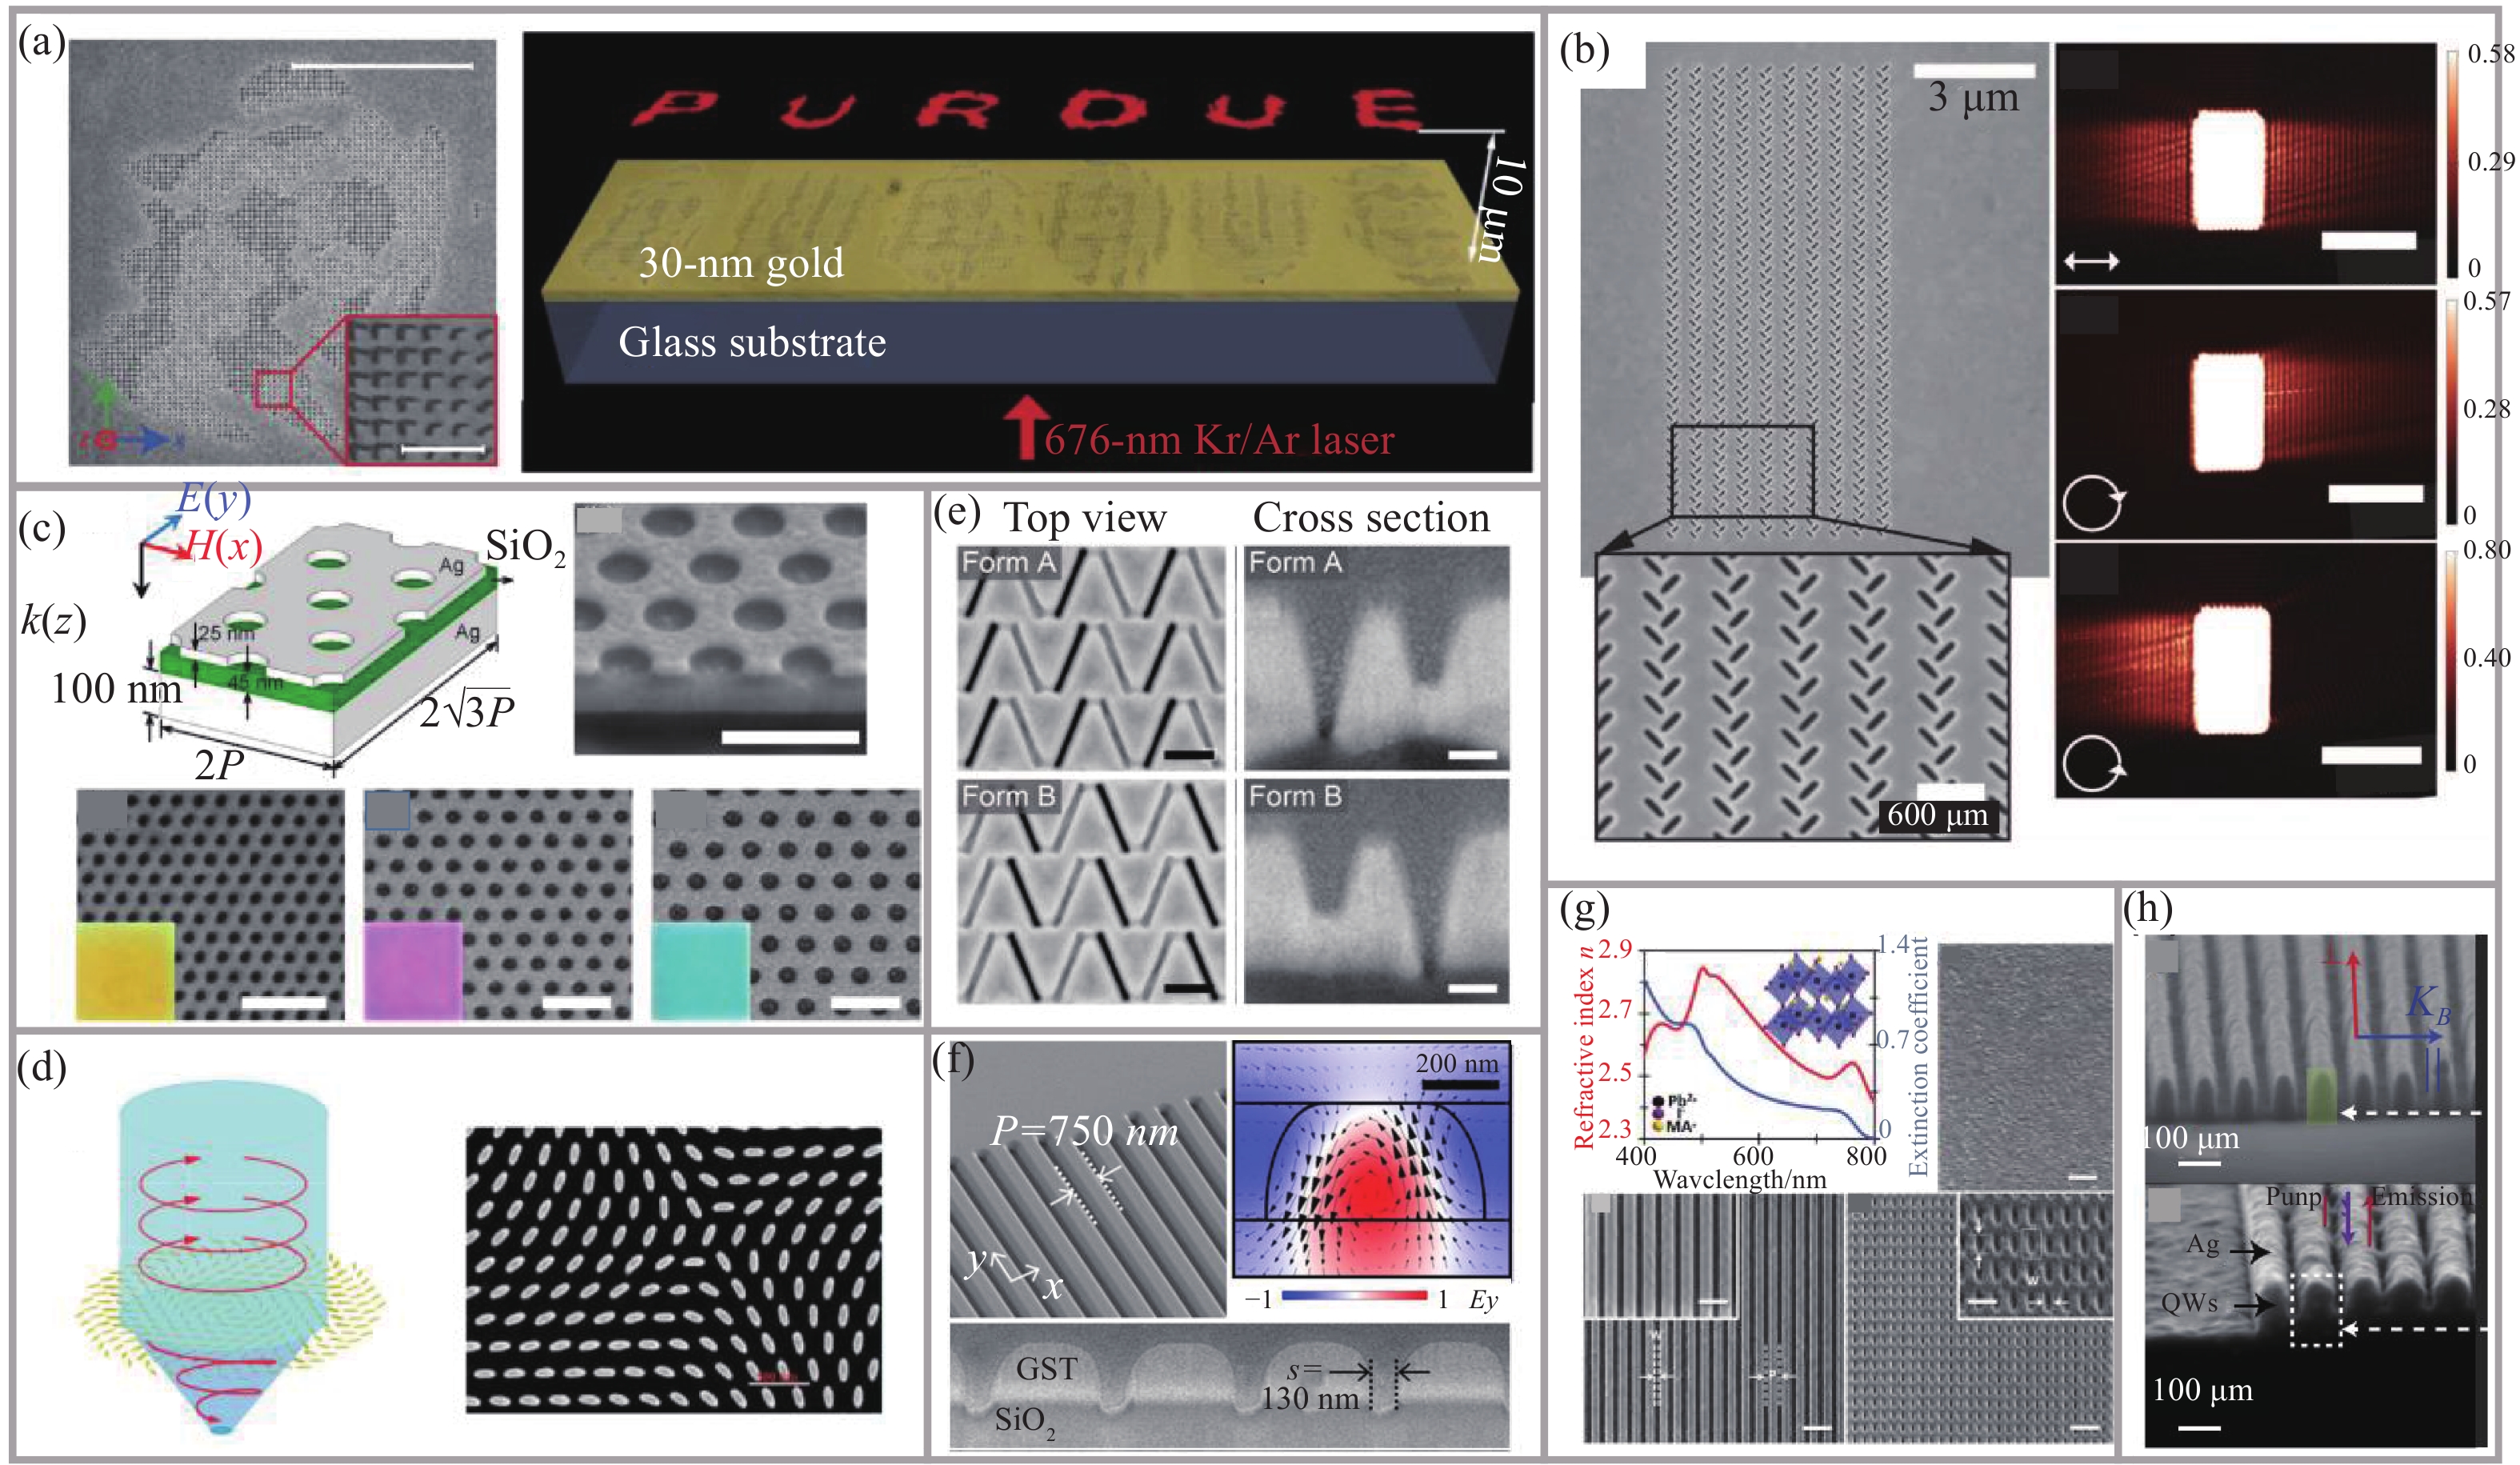 Fabrication of metasurfaces by focused ion beam (FIB) etching. The metallic nano-hole structures fabricated by FIB is used for (a) holographic metasurface, (b) near-field light field control and (c) structural color modulation; (d) Metallic nanopillar-type metasurface etched by FIB for vortex optical focusing; (e) Metasurface of quasi-3D structure fabricated by FIB. Non-metallic metasurface fabricated by FIB, such as (f) GST phase change material metasurface, (g) perovskite metasurface and (h) metal-dielectric multi-material laminated structure